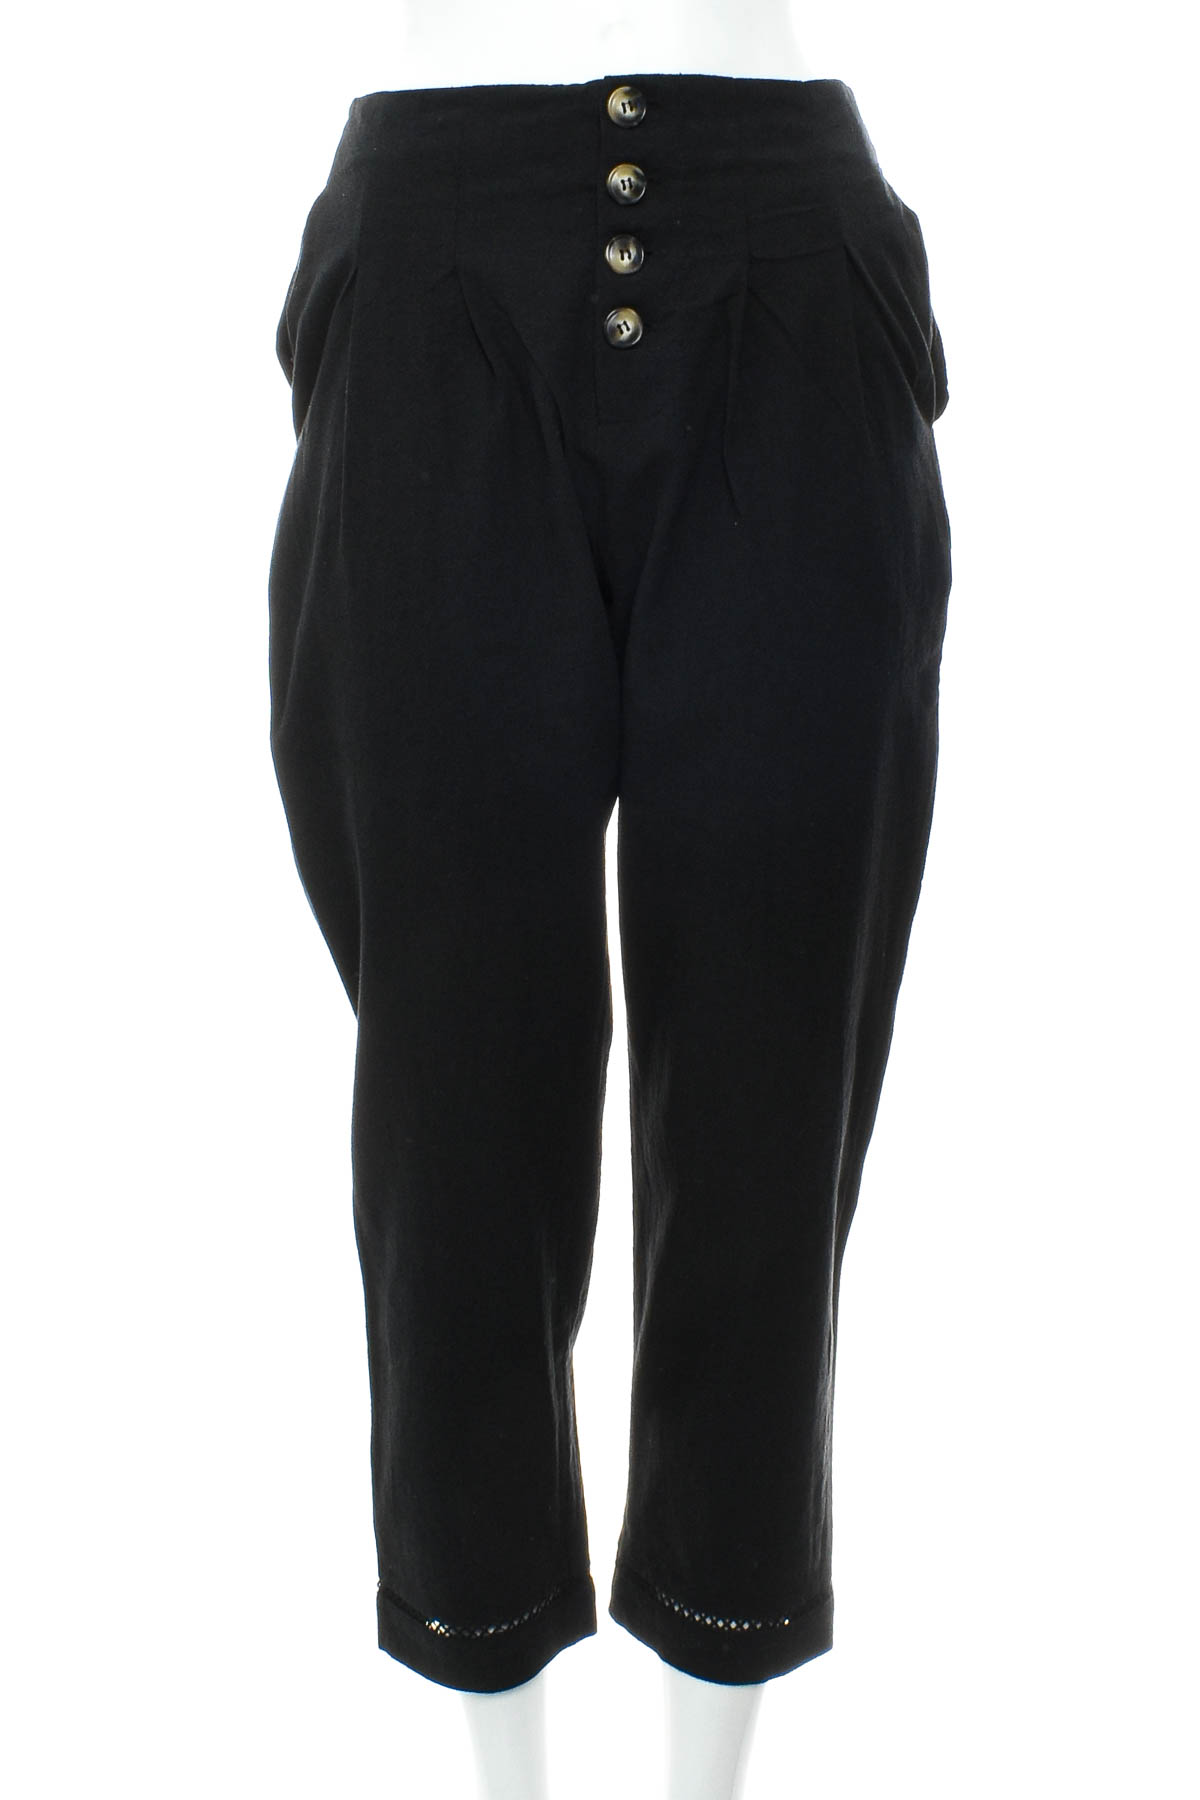 Women's trousers - NORACORA - 0